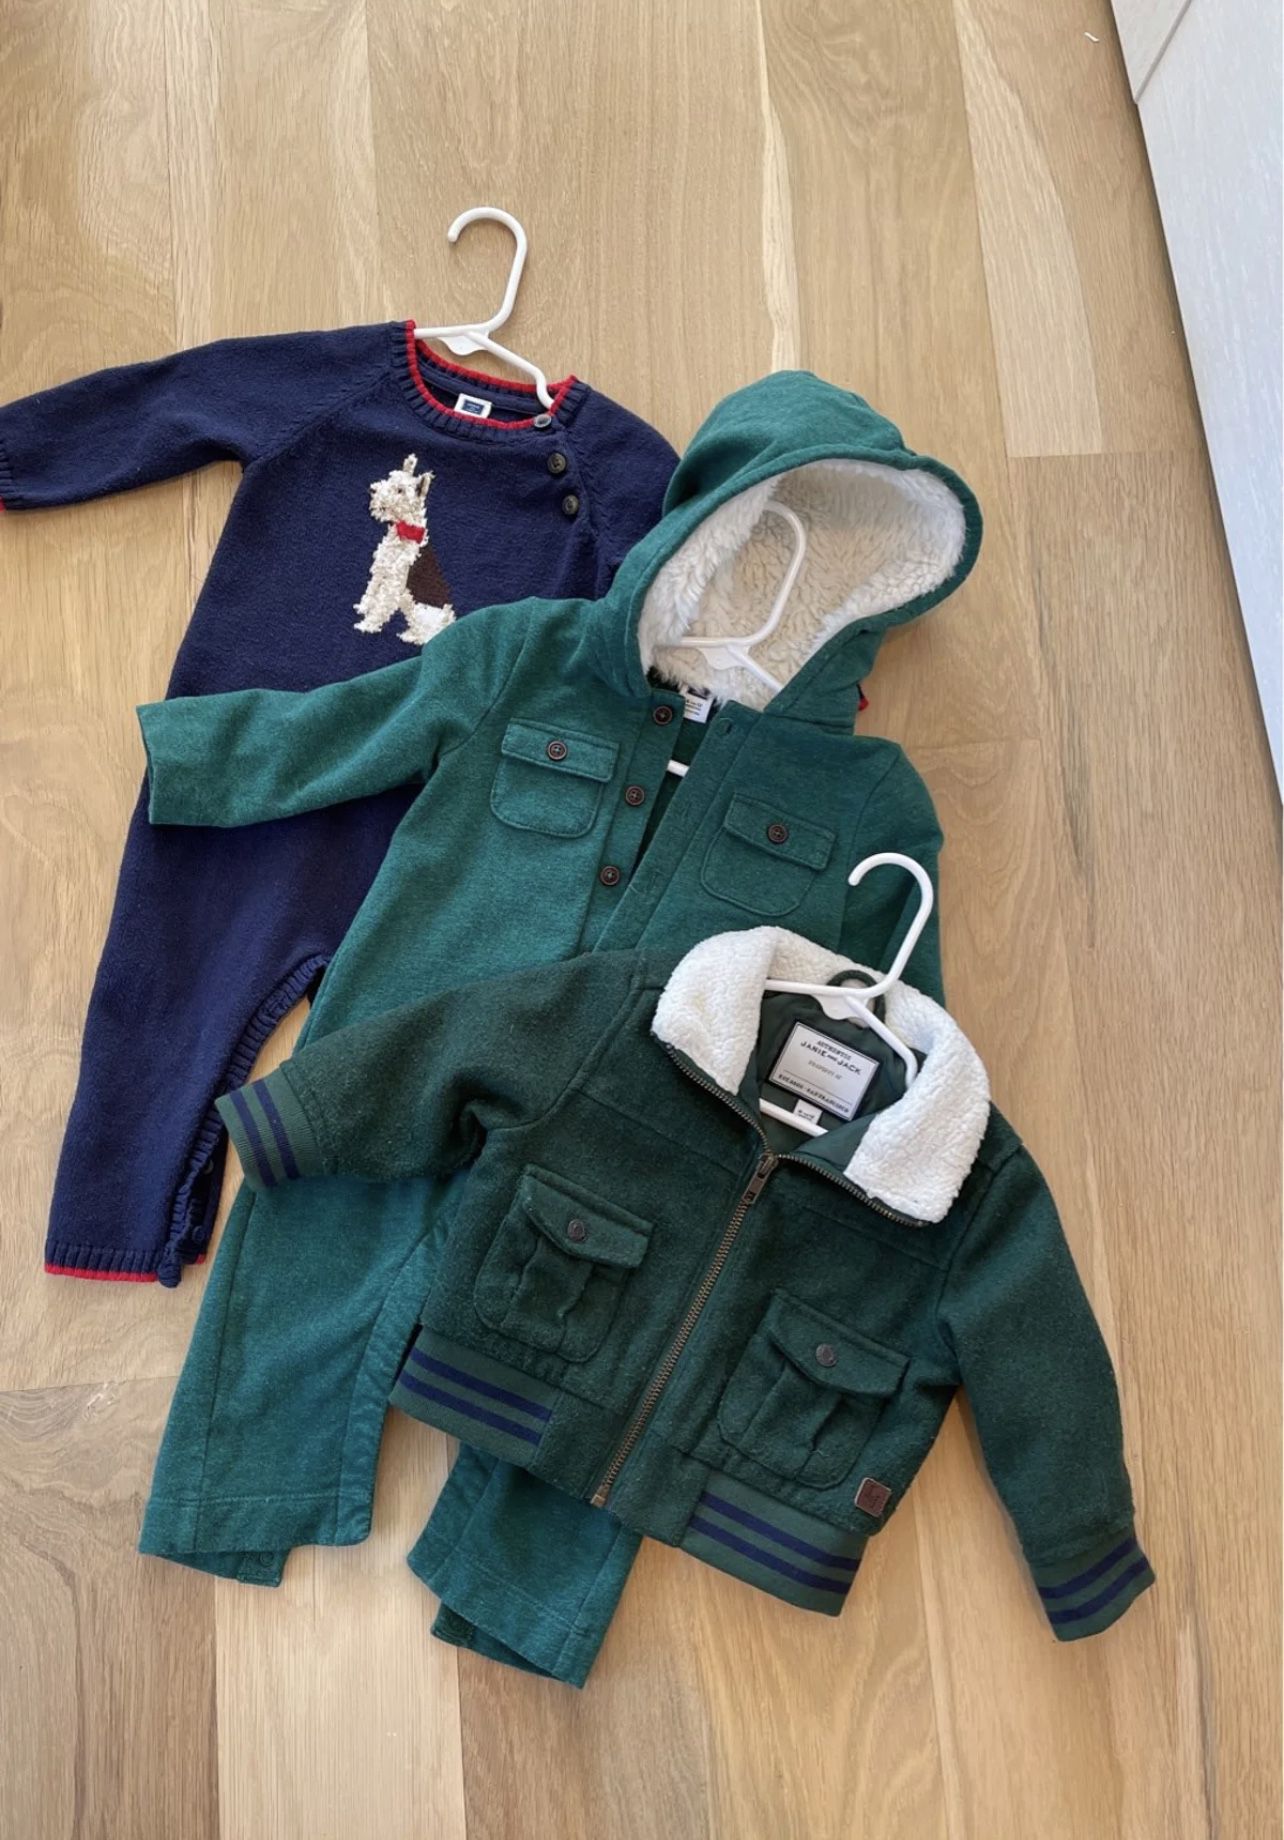 Janie And Jack 6-12 Months Winter Bundle Barely Used 